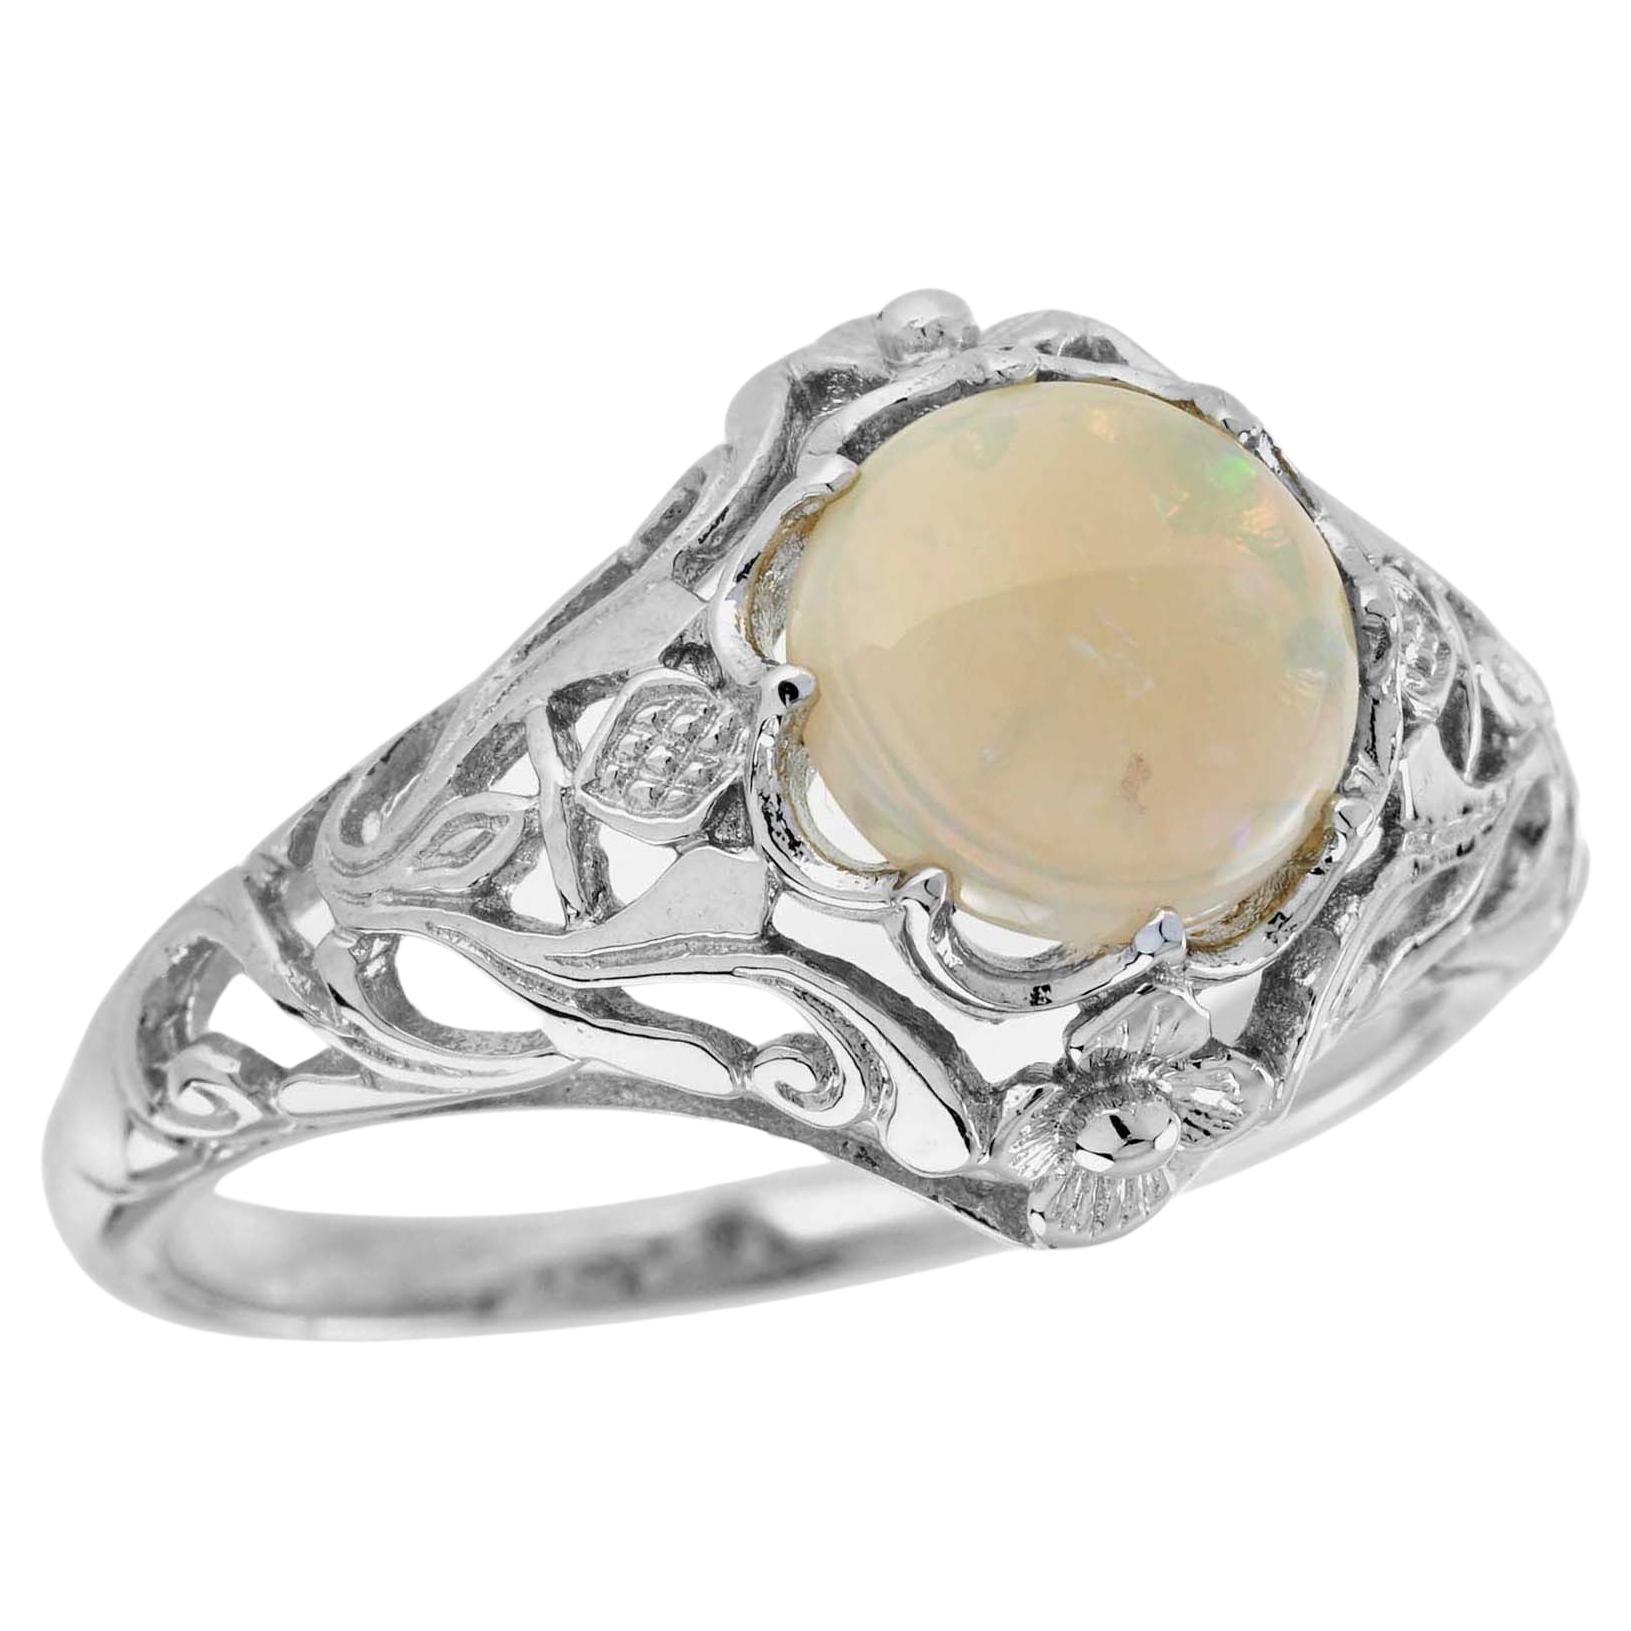 Natural Opal Vintage Style Filigree Solitaire Ring in Solid 9K White Gold